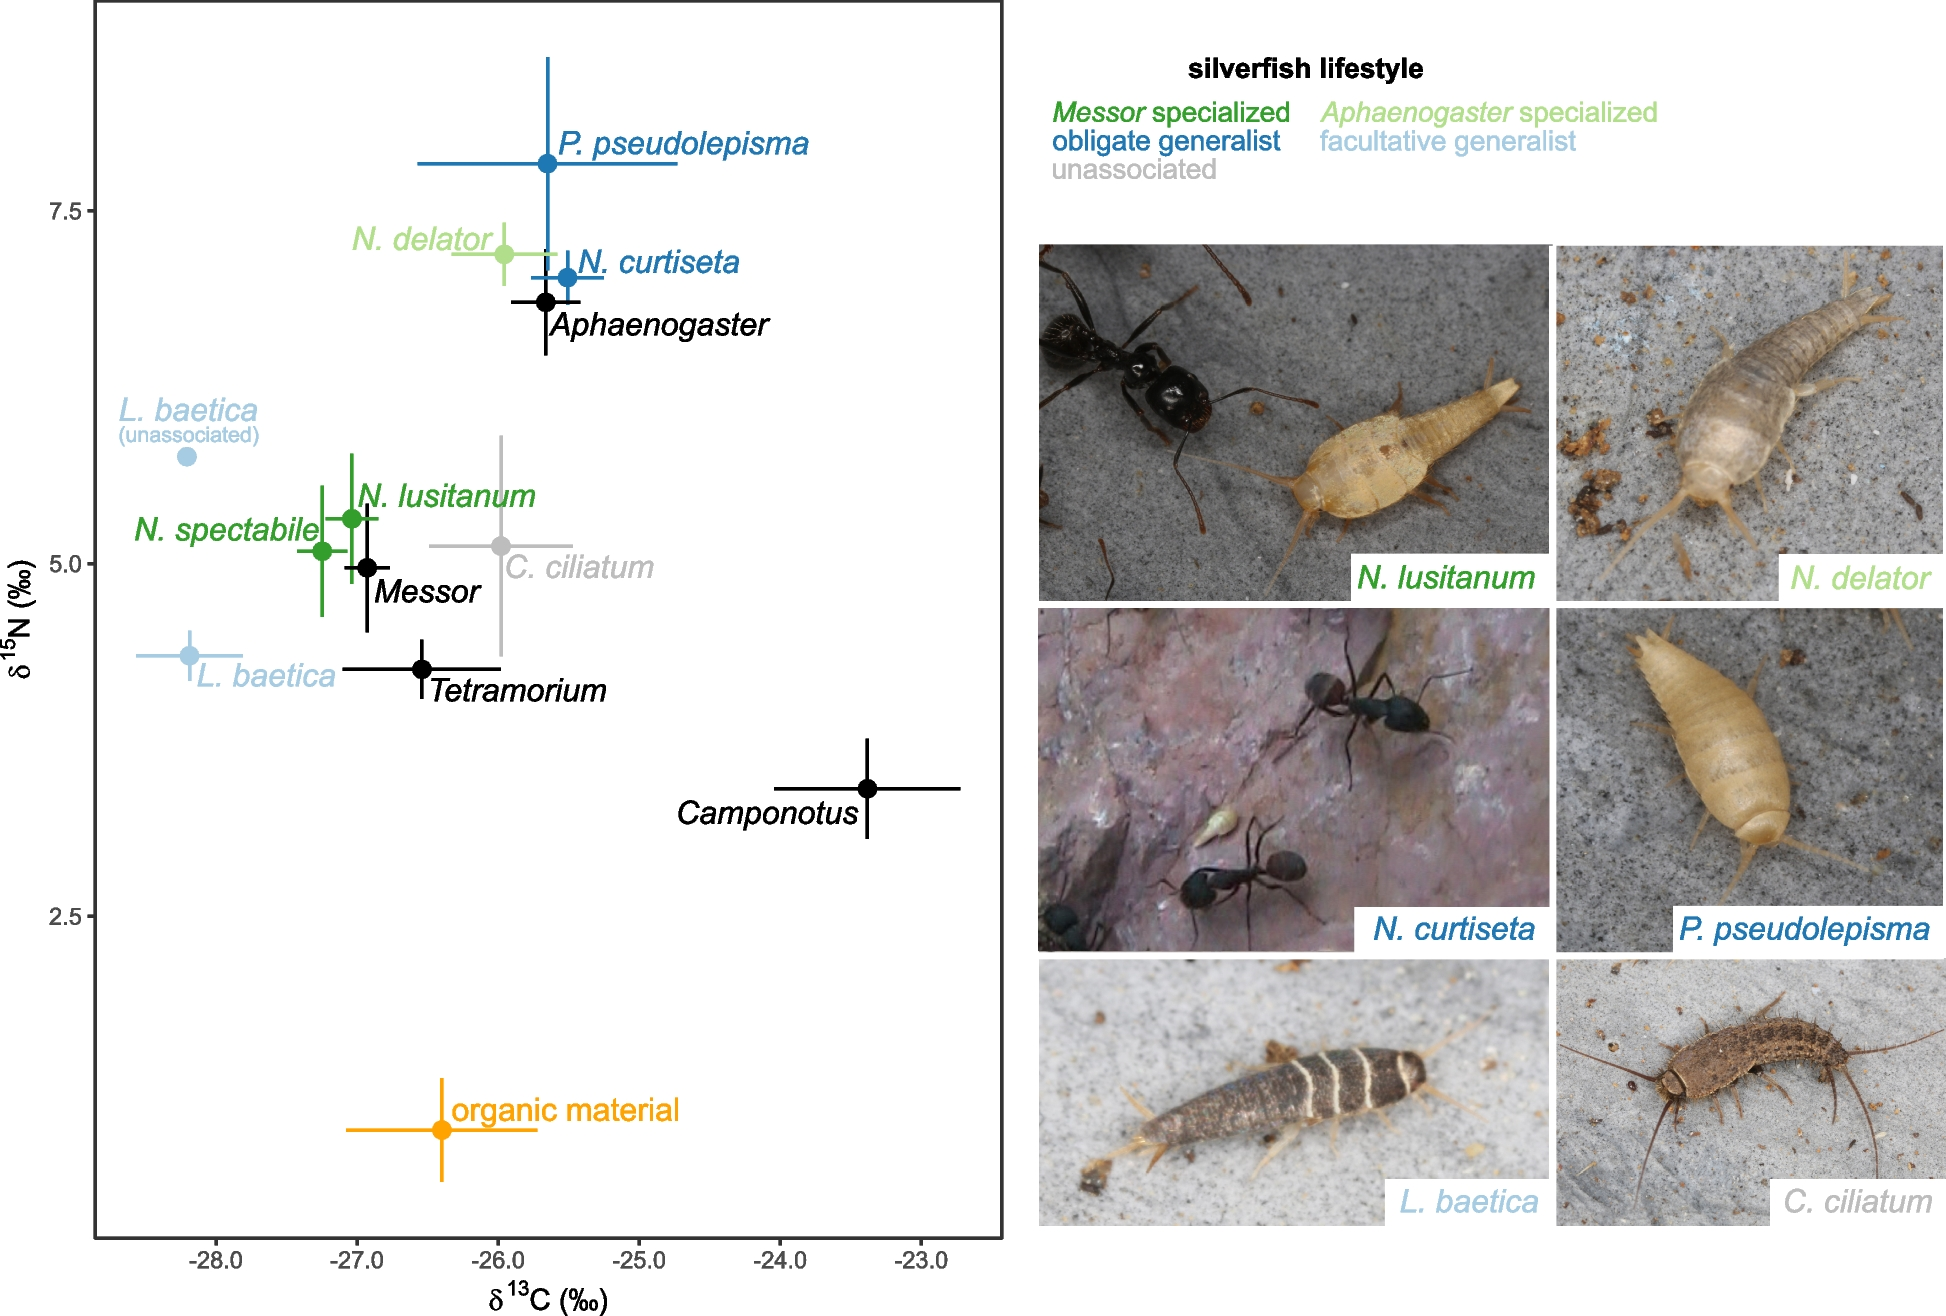 Co-habiting ants and silverfish display a converging feeding ecology